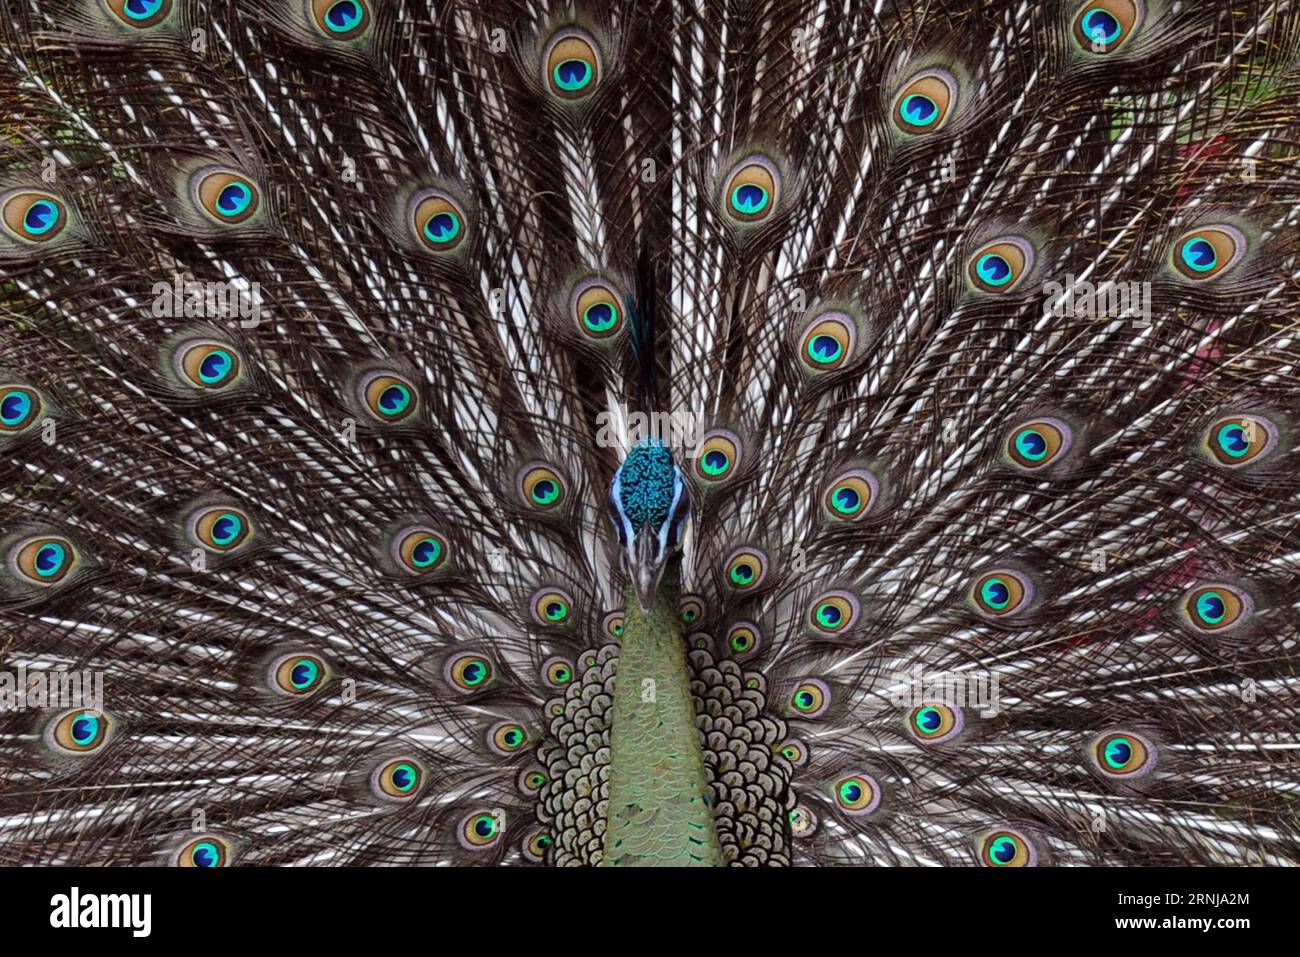 A green peafowl displays its tail feathers in Singapore s Jurong Bird Park, Jan. 11, 2017. The Jurong Bird Park unveiled the Fowl Trail on Wednesday, showcasing an assortment of pheasants, peafowls and junglefowls as part of the celebrations for the upcoming Year of Rooster. ) (hy) SINGAPORE-JURONG BIRD PARK-FOWL TRAIL ThenxChihxWey PUBLICATIONxNOTxINxCHN   a Green Peafowl Displays its Tail Feathers in Singapore S Jurong Bird Park Jan 11 2017 The Jurong Bird Park unveiled The Fowl Trail ON Wednesday showcasing to assortment of pheasants peafowls and  As Part of The celebrations for The upcomin Stock Photo